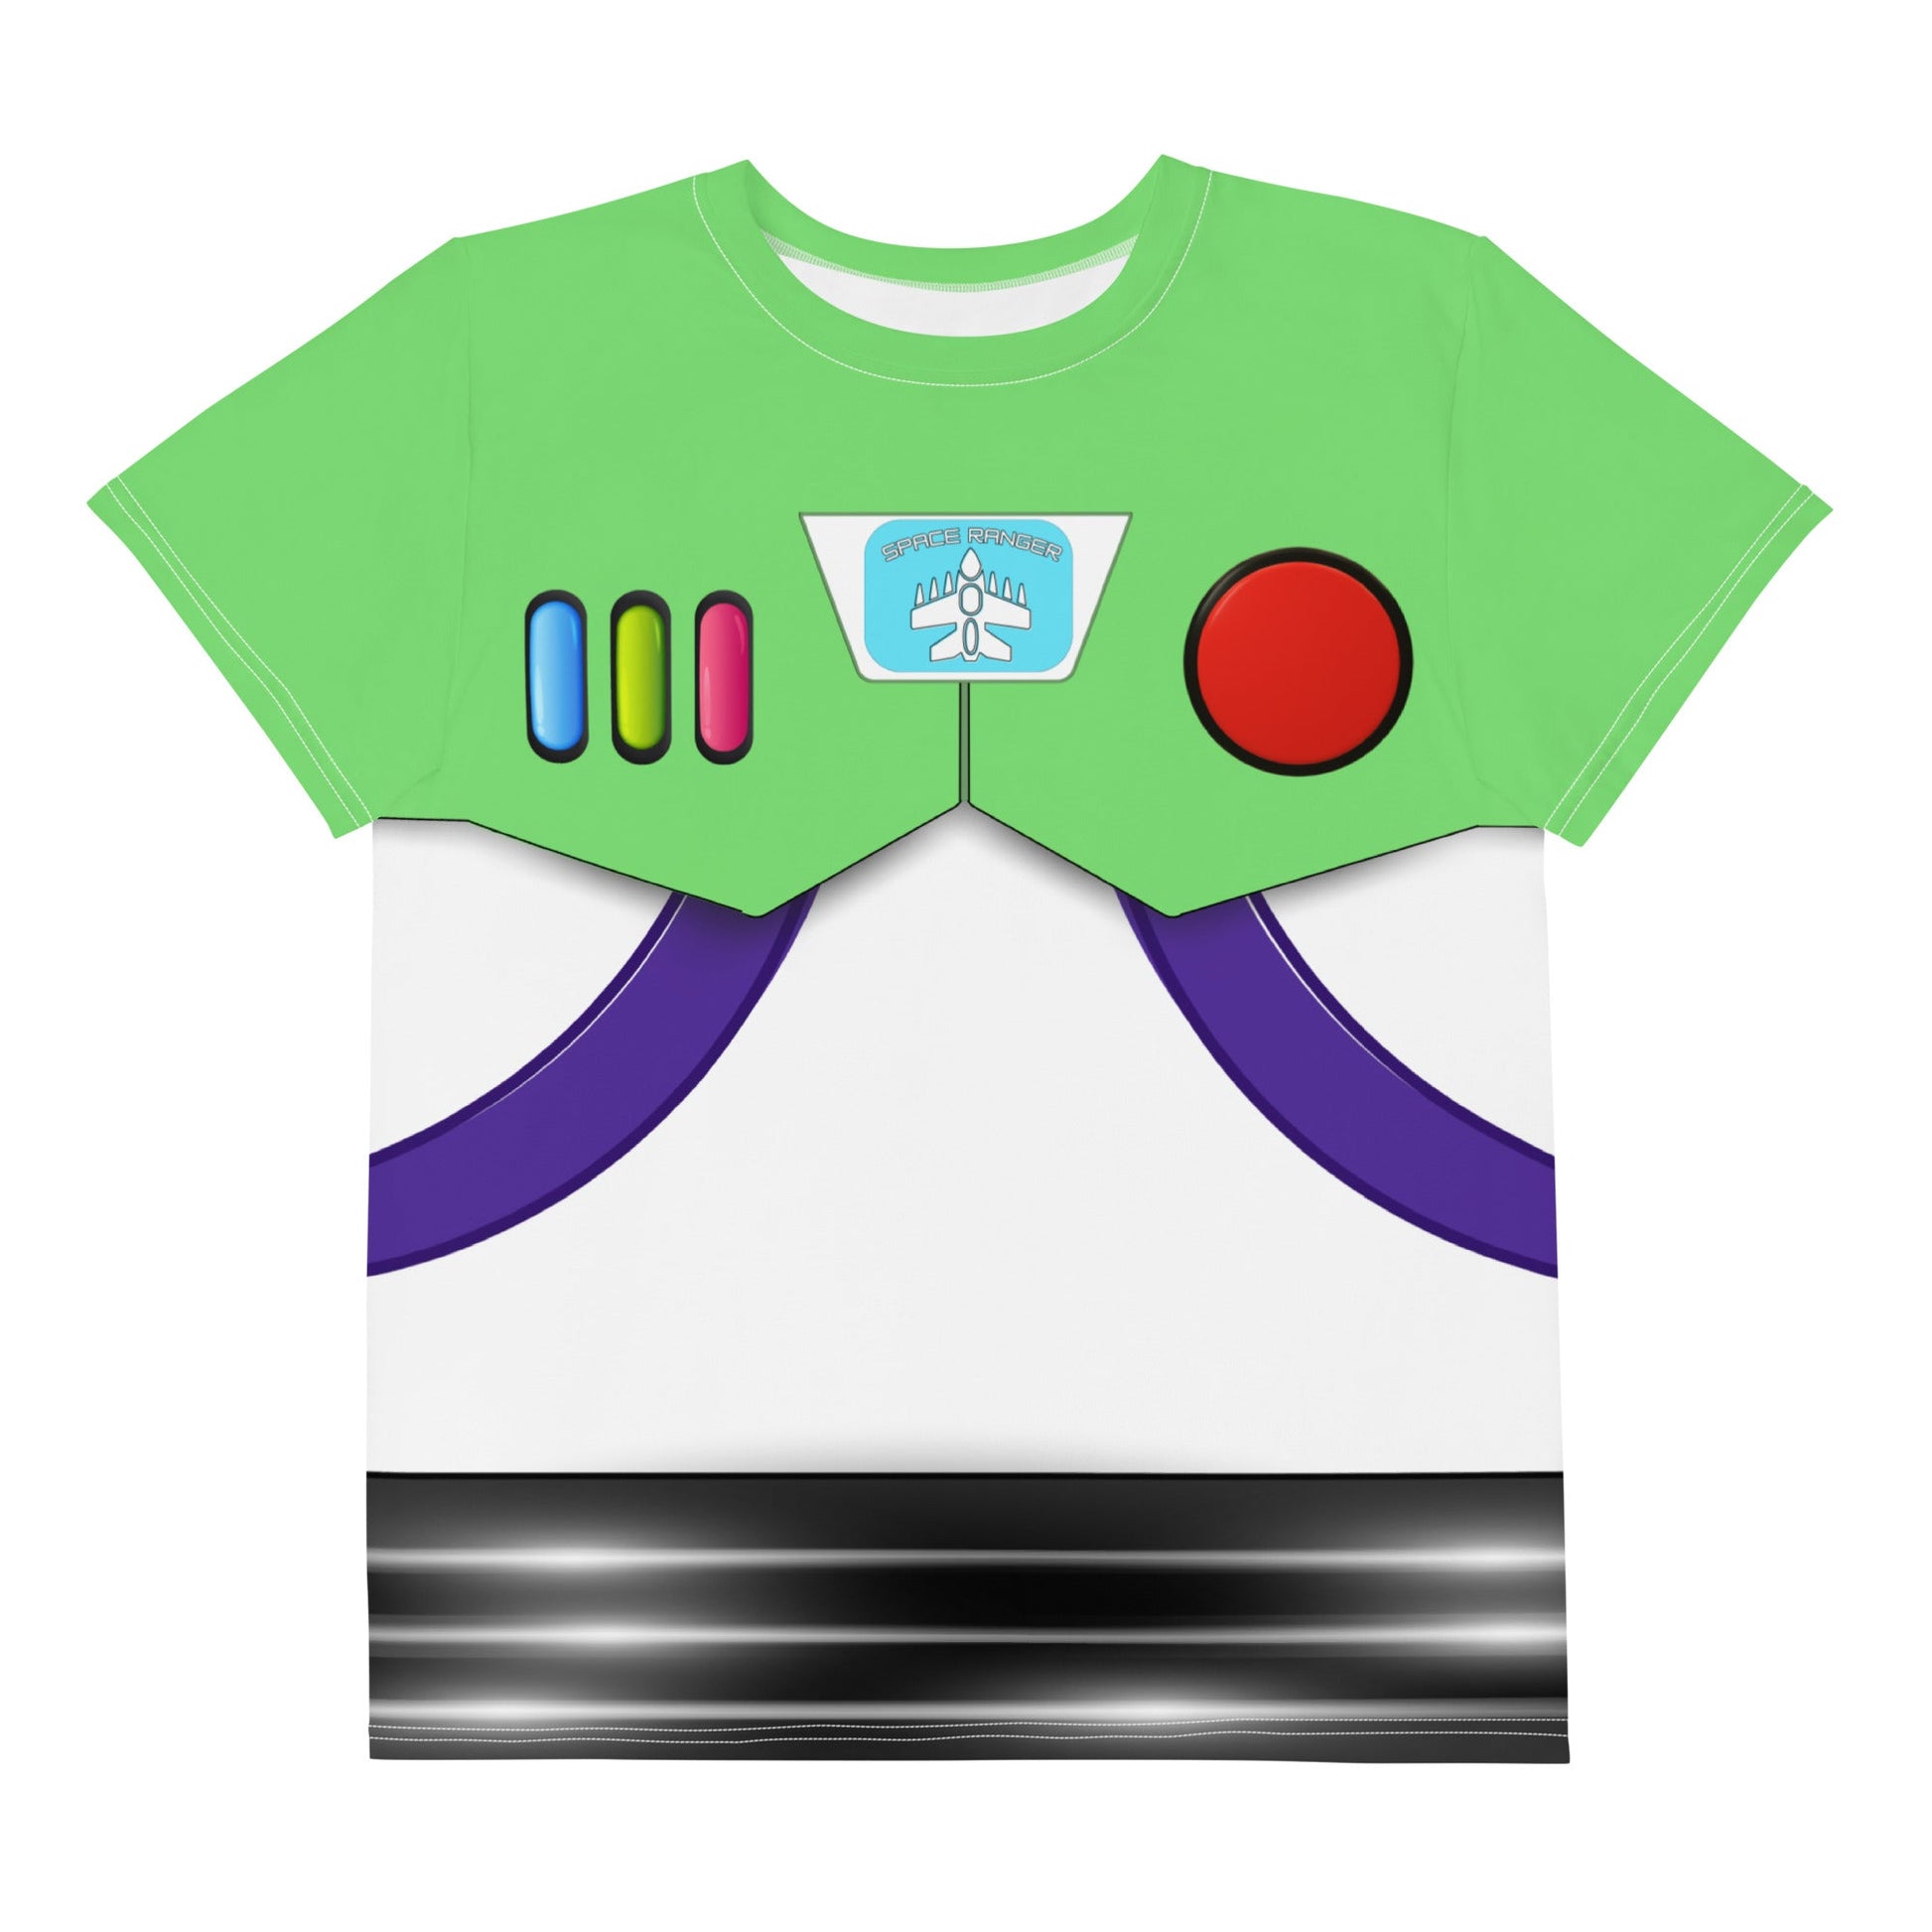 The Buzz Youth crew neck t-shirt- Running Costume, Cosplay, Bounding adult disneybuzz lightyearbuzz lightyear dress#tag4##tag5##tag6#